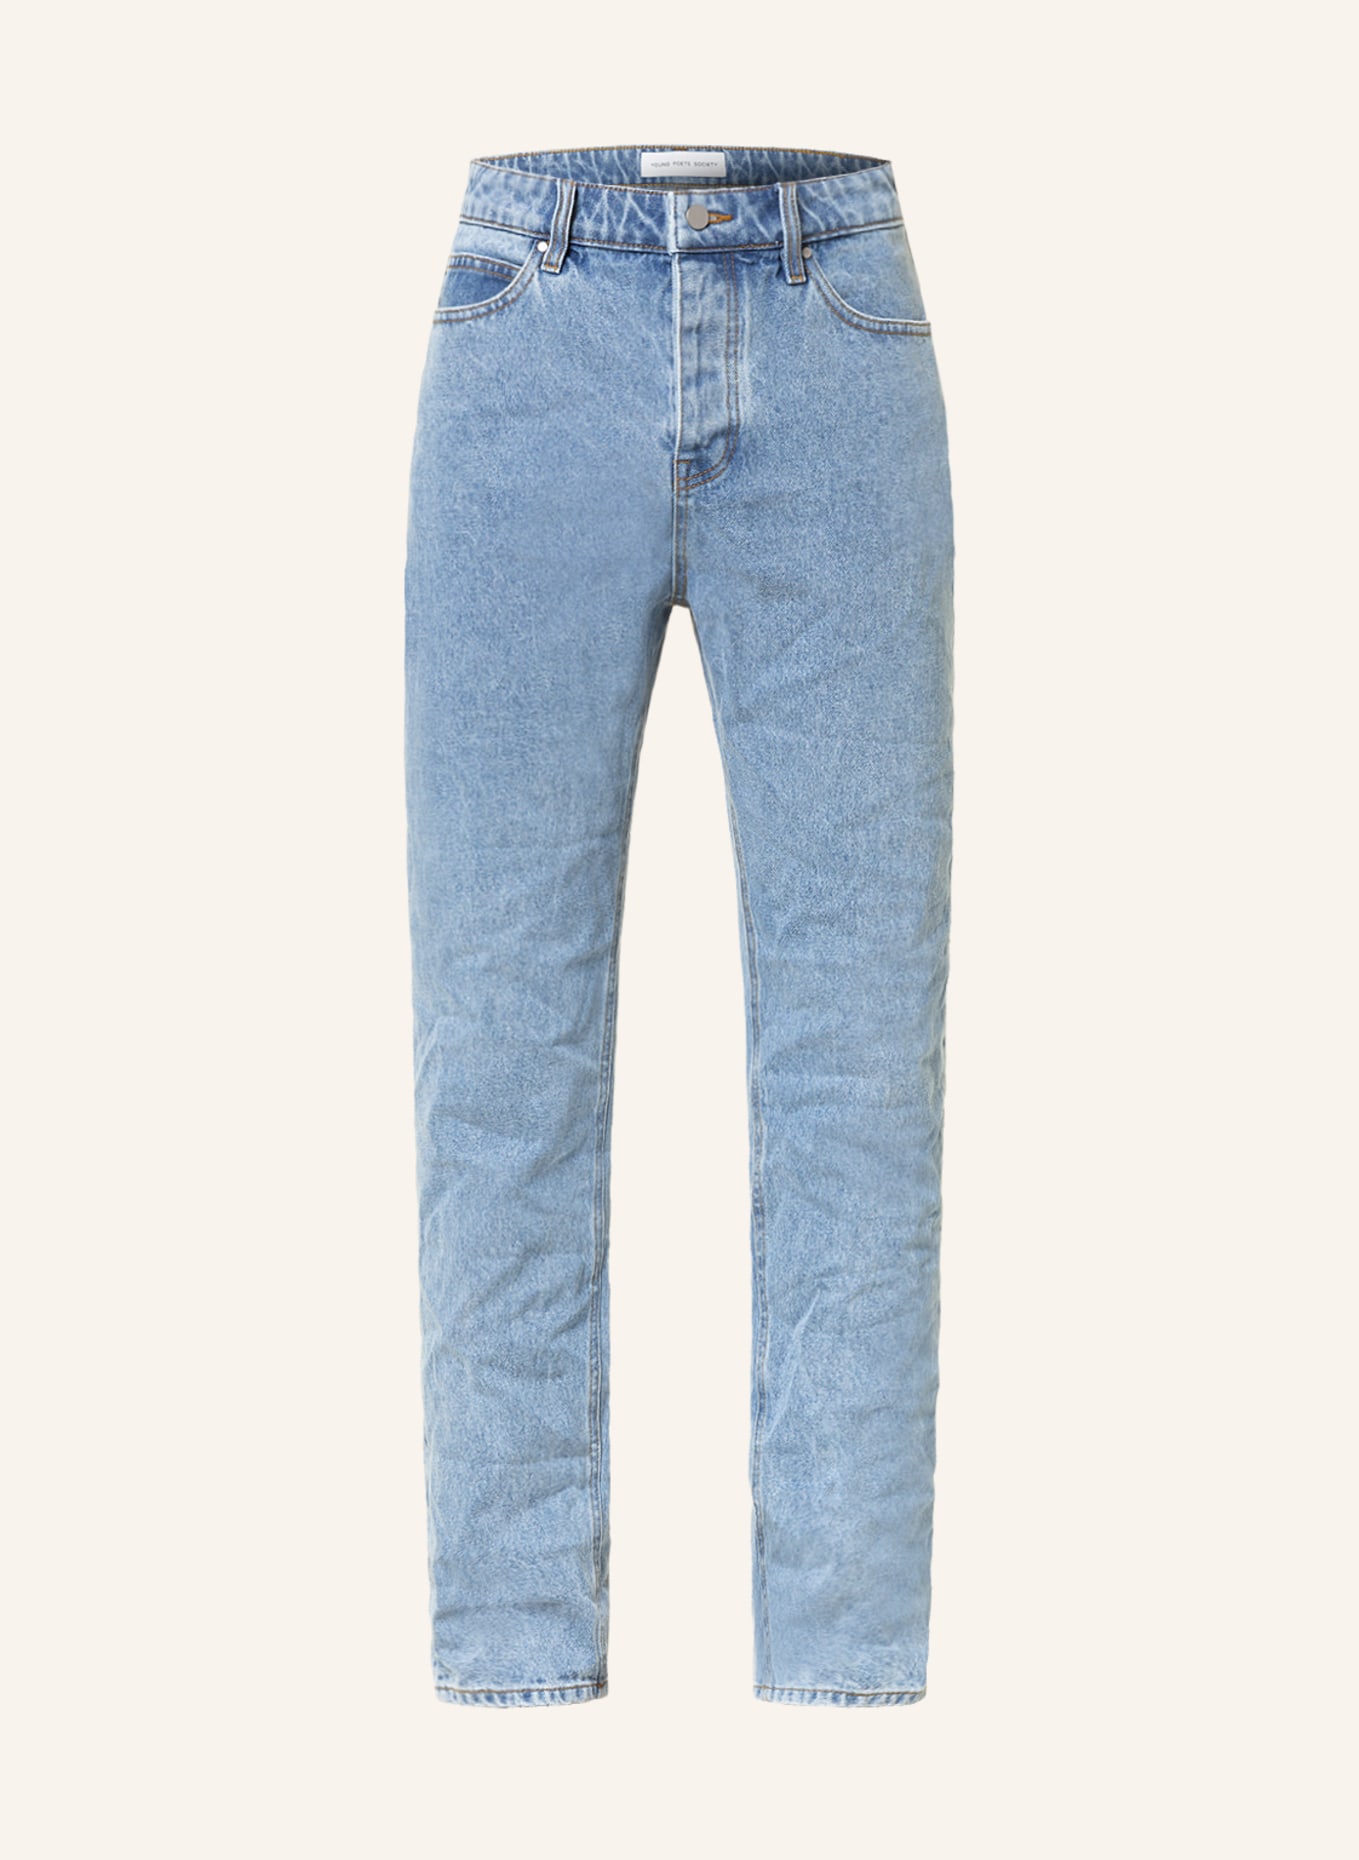 YOUNG POETS Jeans COLE 1001 regular fit, Color: 522 Mid Blue (Image 1)